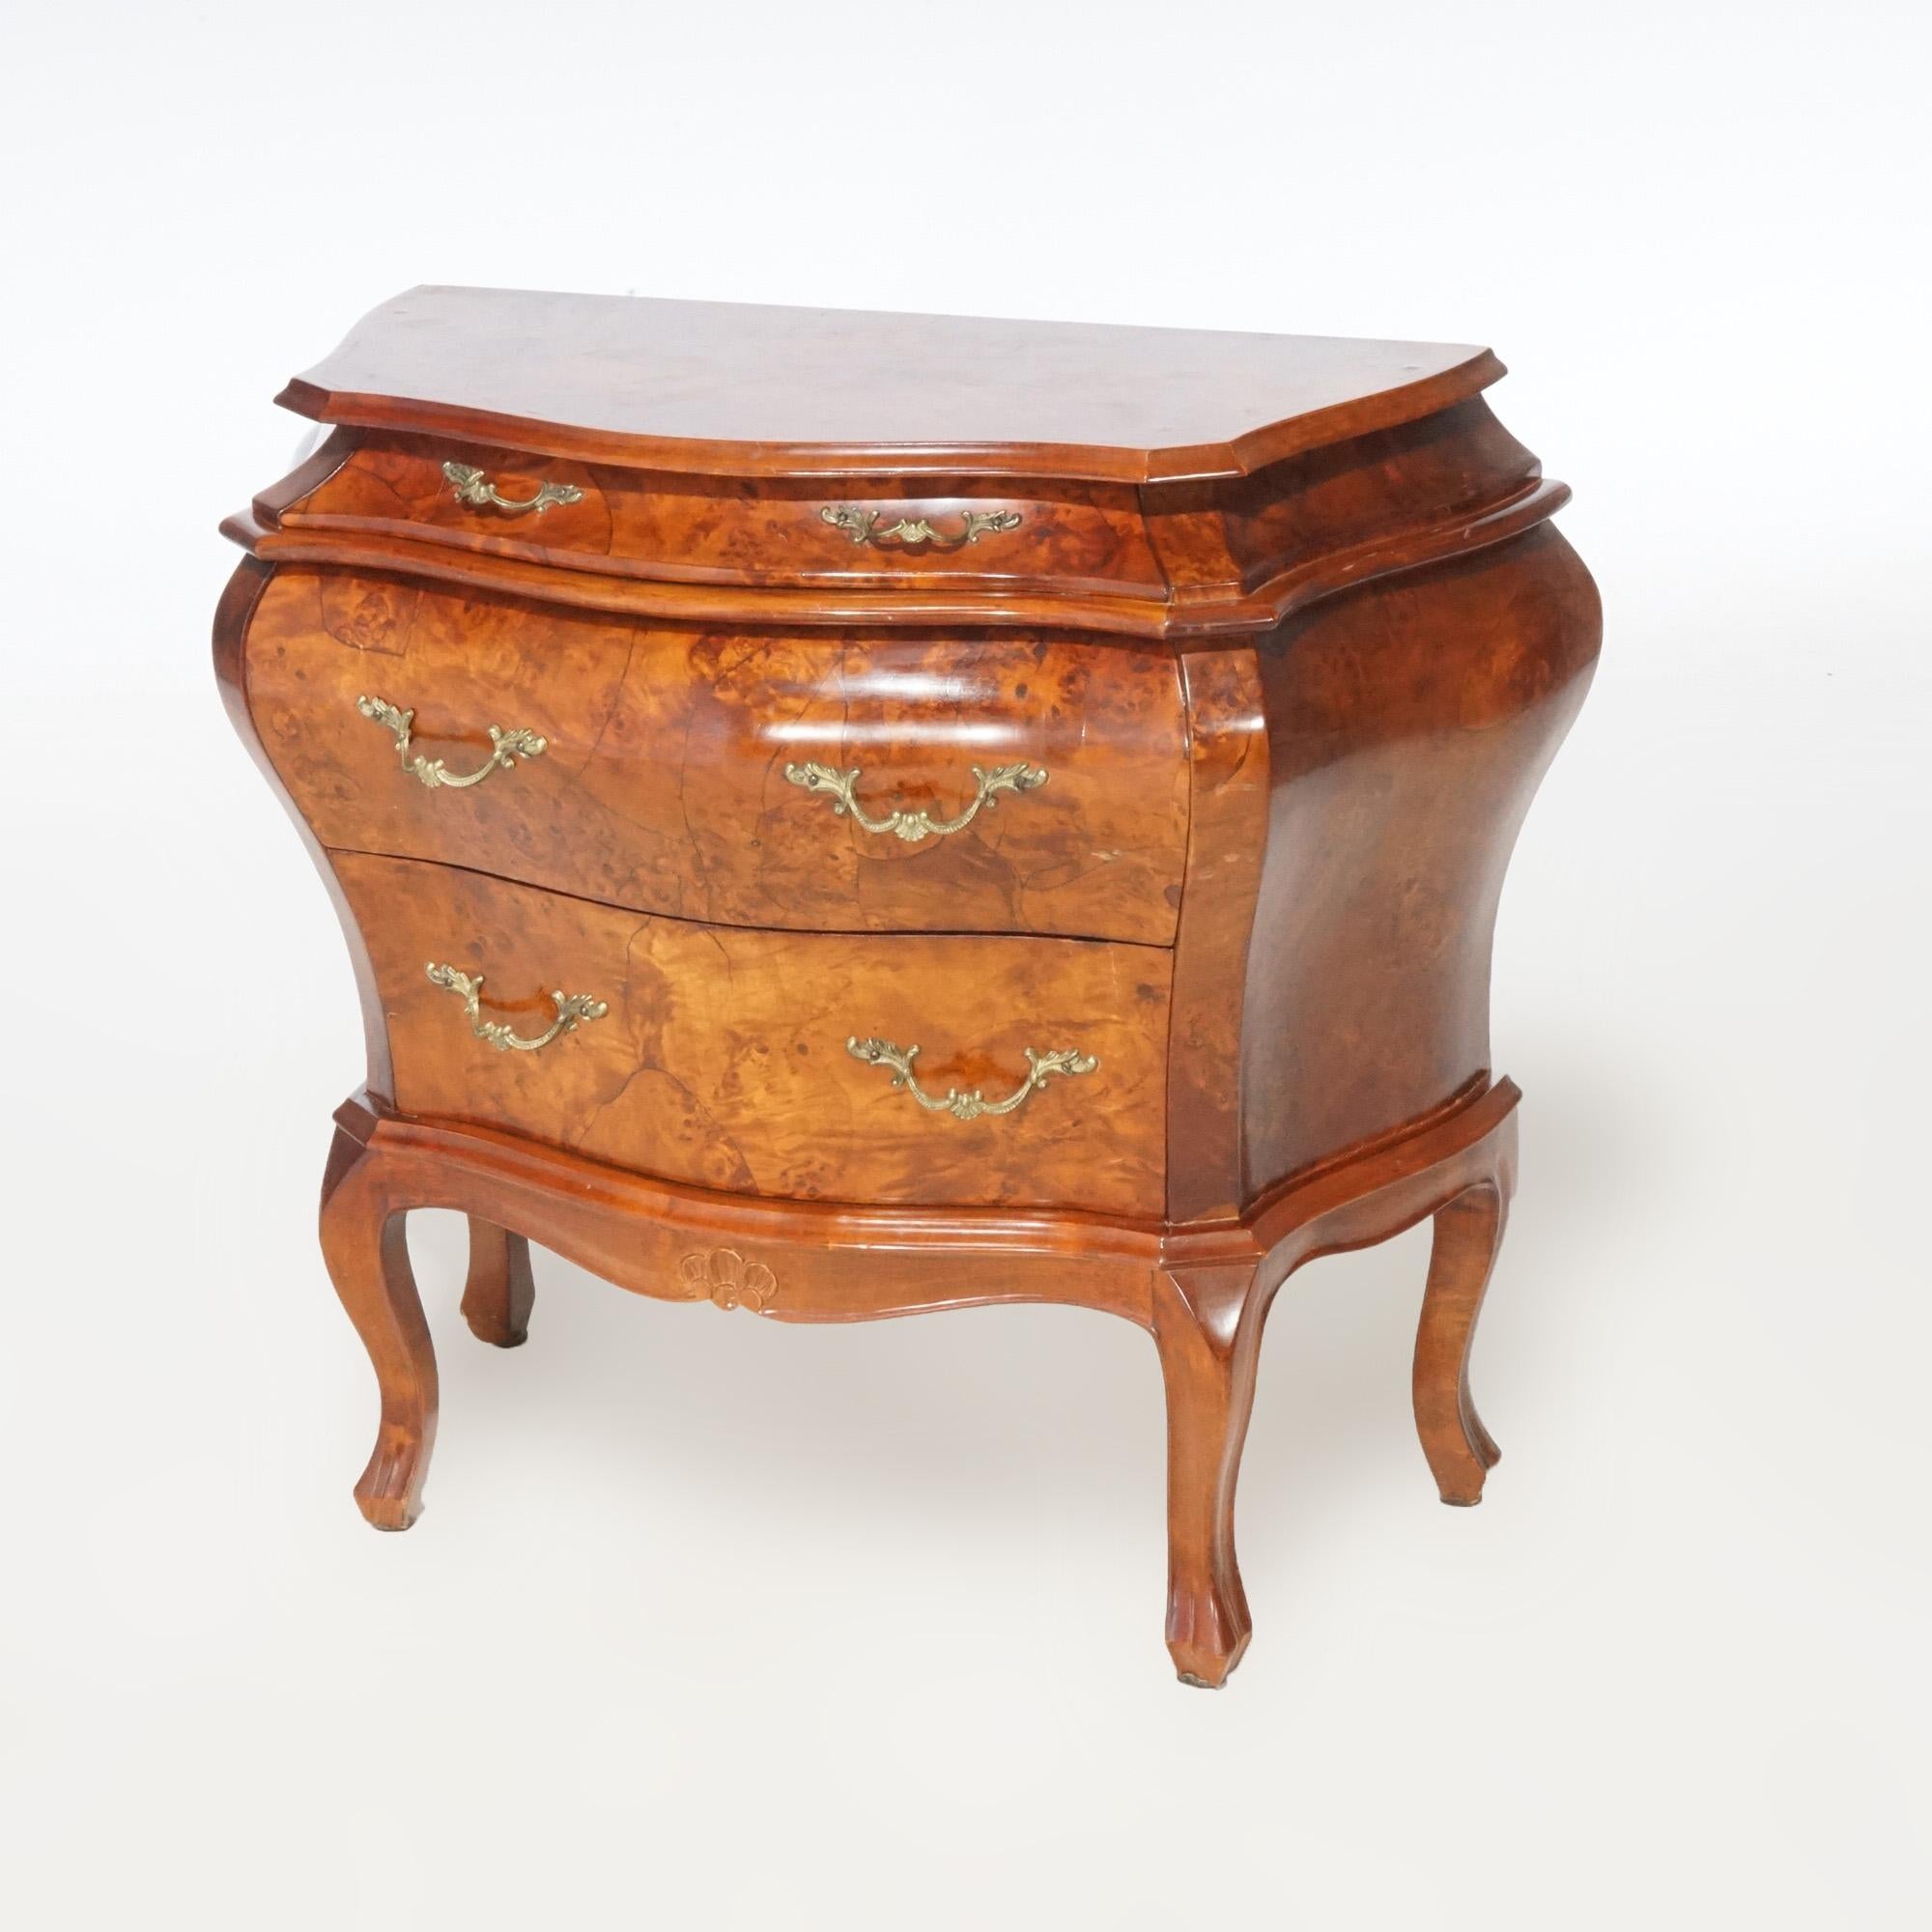 An Italian side stand by Bombay offers burl construction with three drawers and raised on cabriole legs, maker label en verso as photographed, 20th century.

Measures - 26